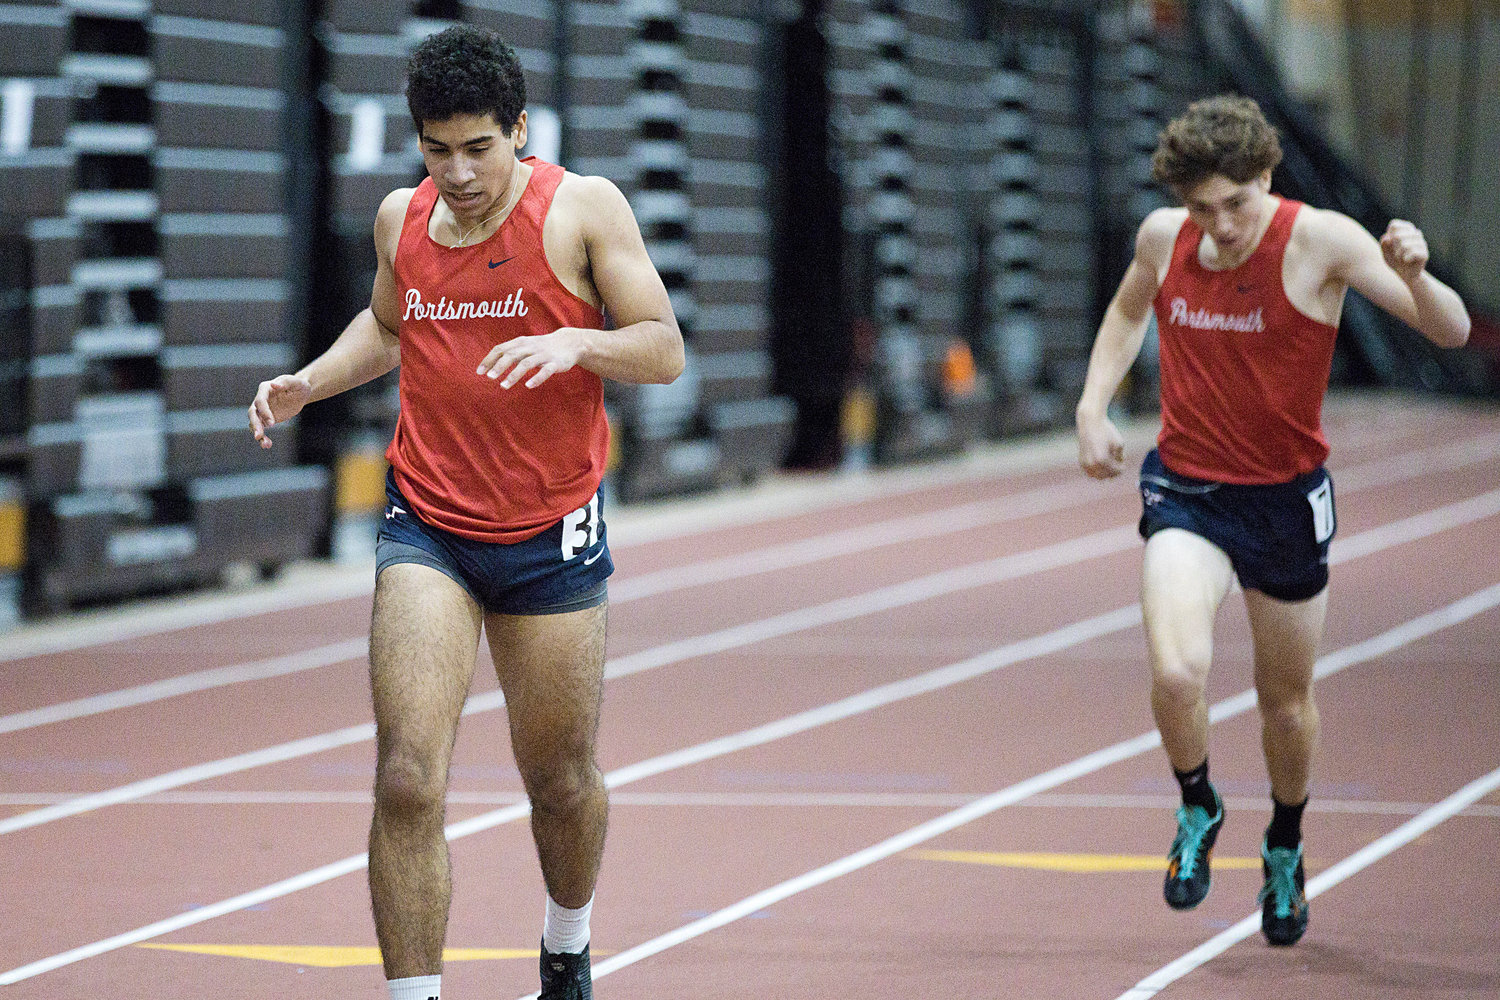 Jay DeFalco finished the 600 meter race just ahead of teammate, Wake Zani.